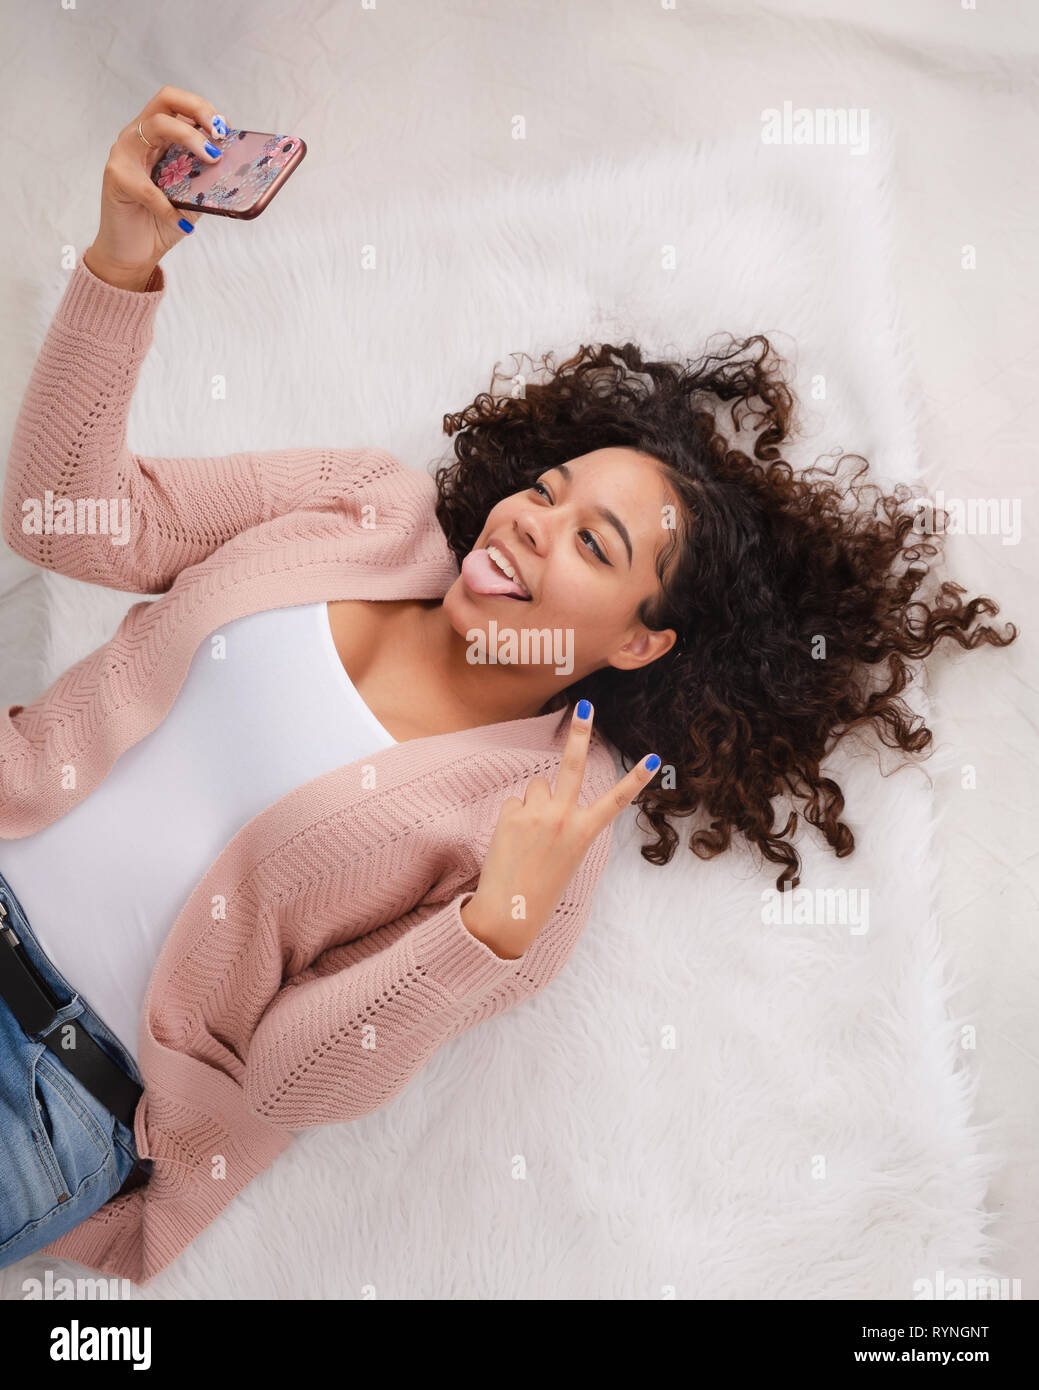 Attractive biracial high school senior laying down on floor smiling and posing for selfie to go on social media Stock Photo